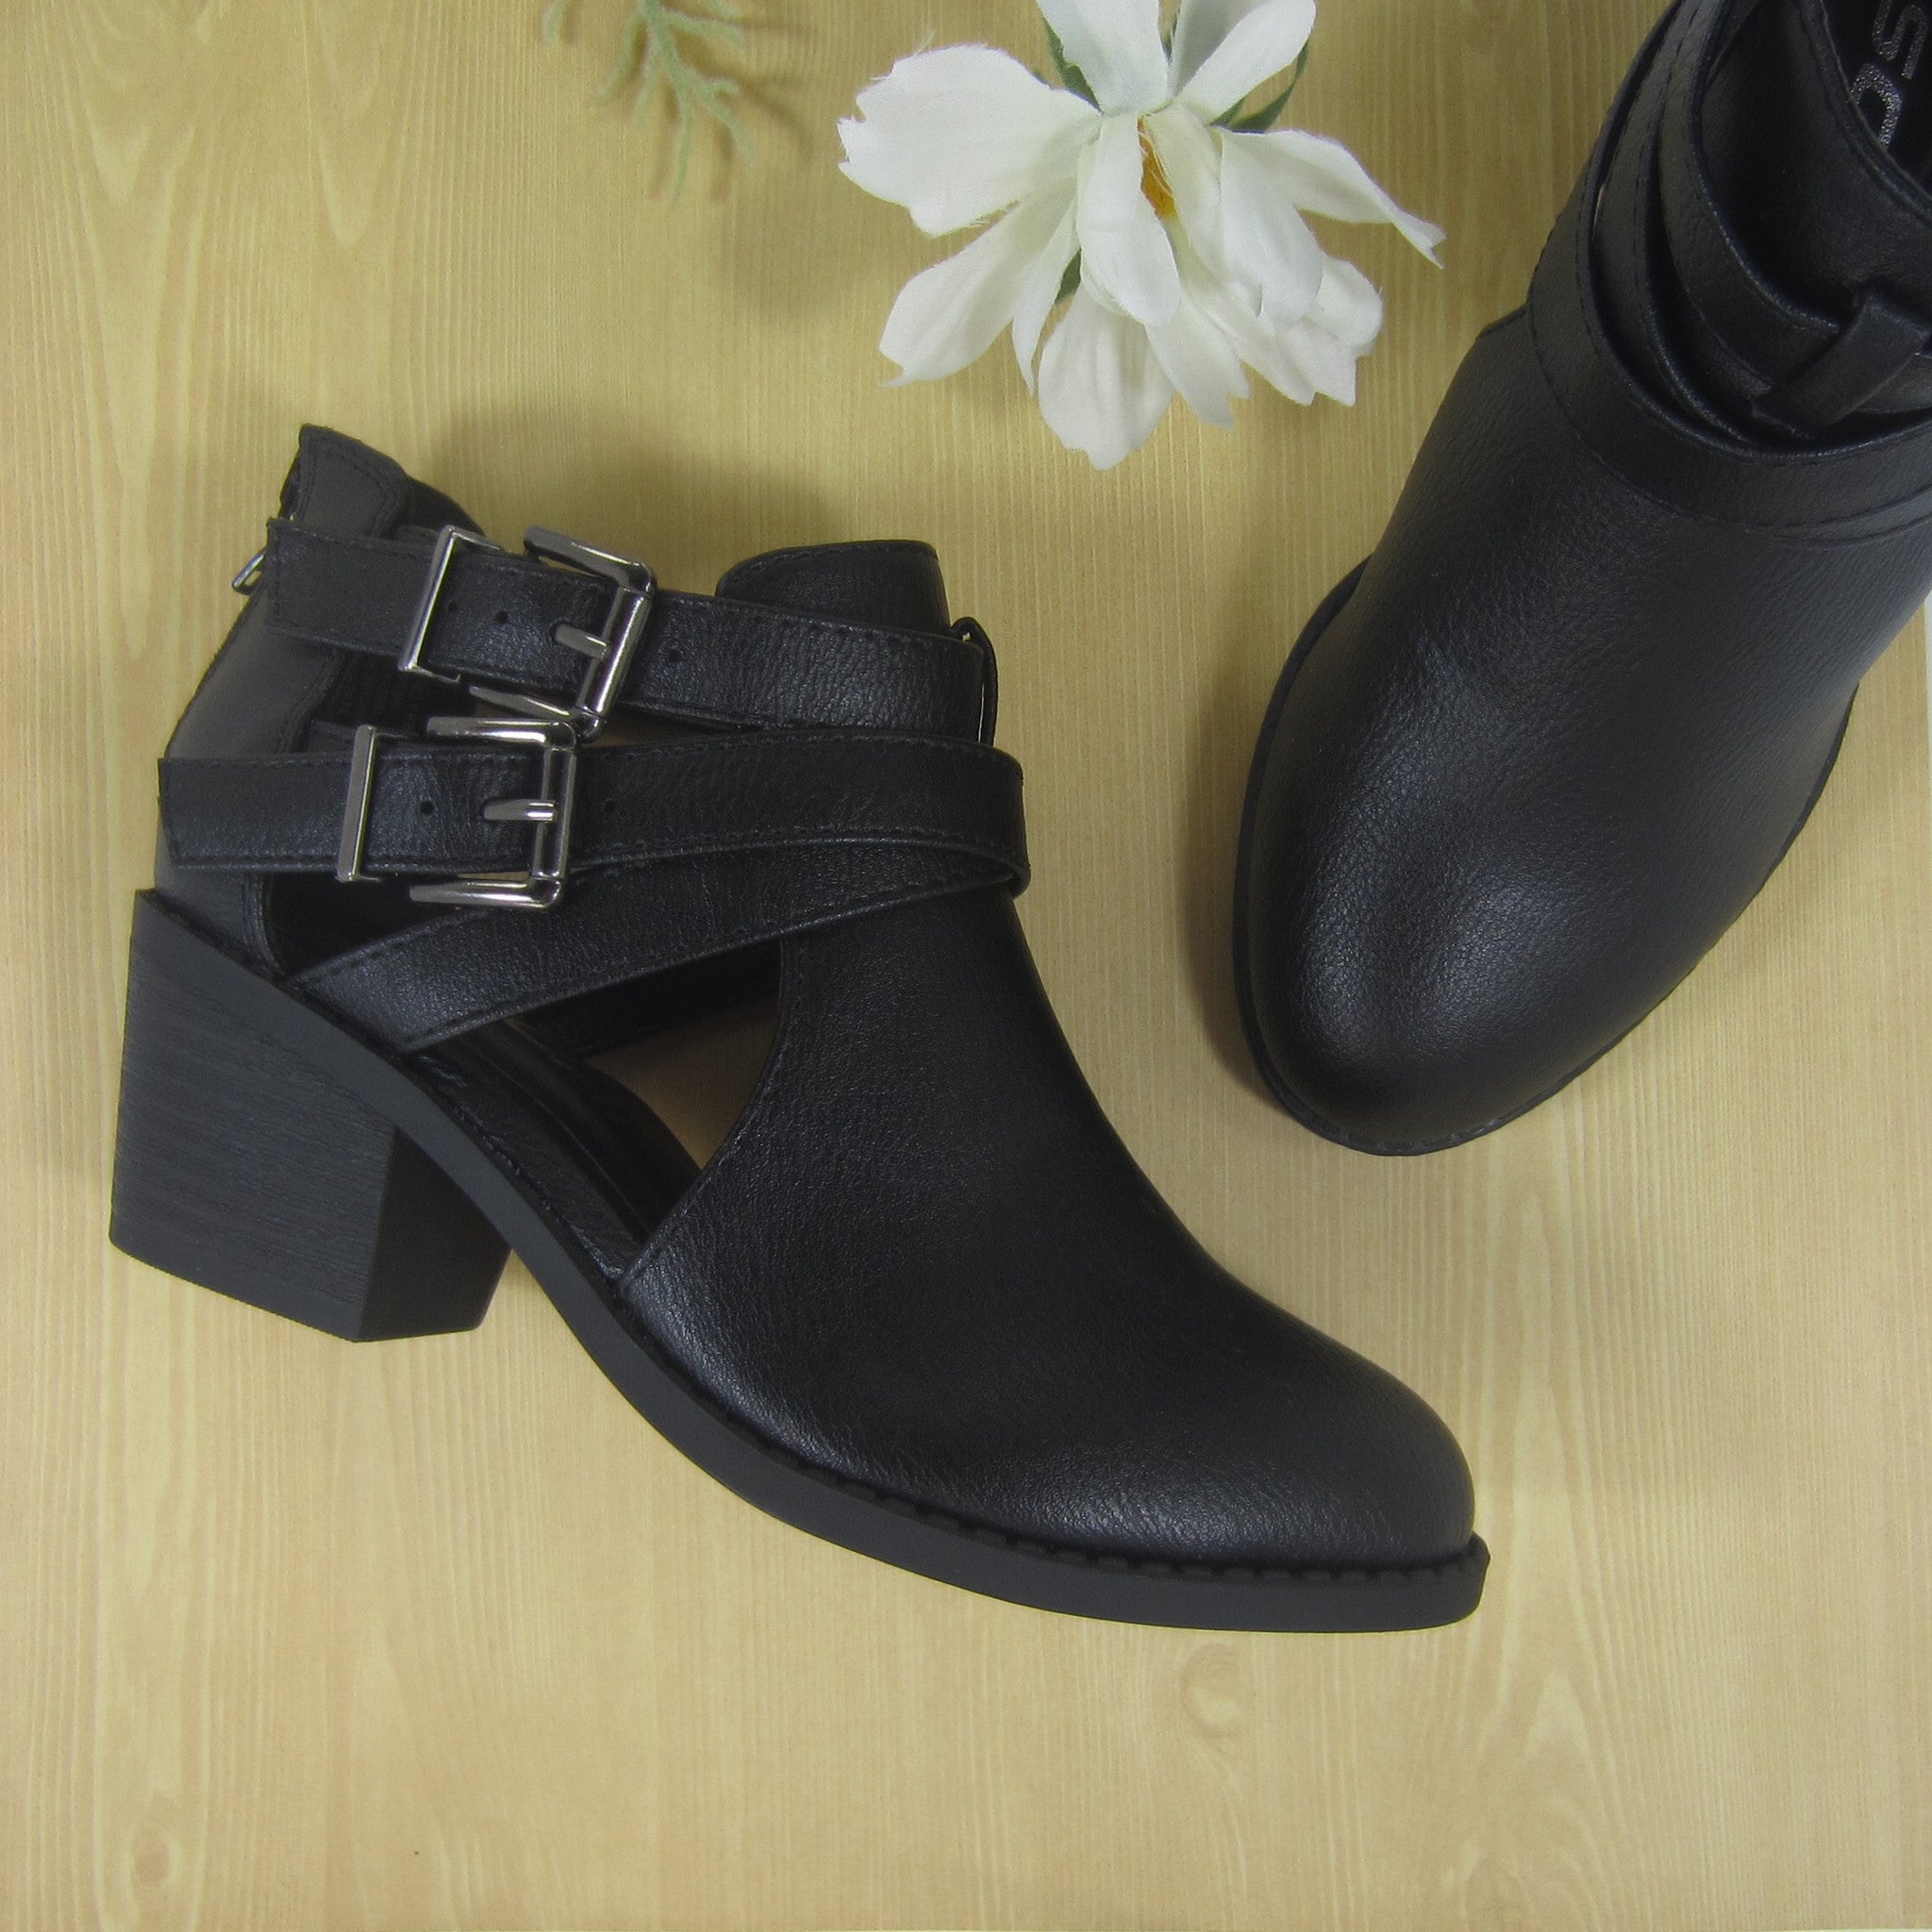 Girls Black Criss Cross Ankle Boots